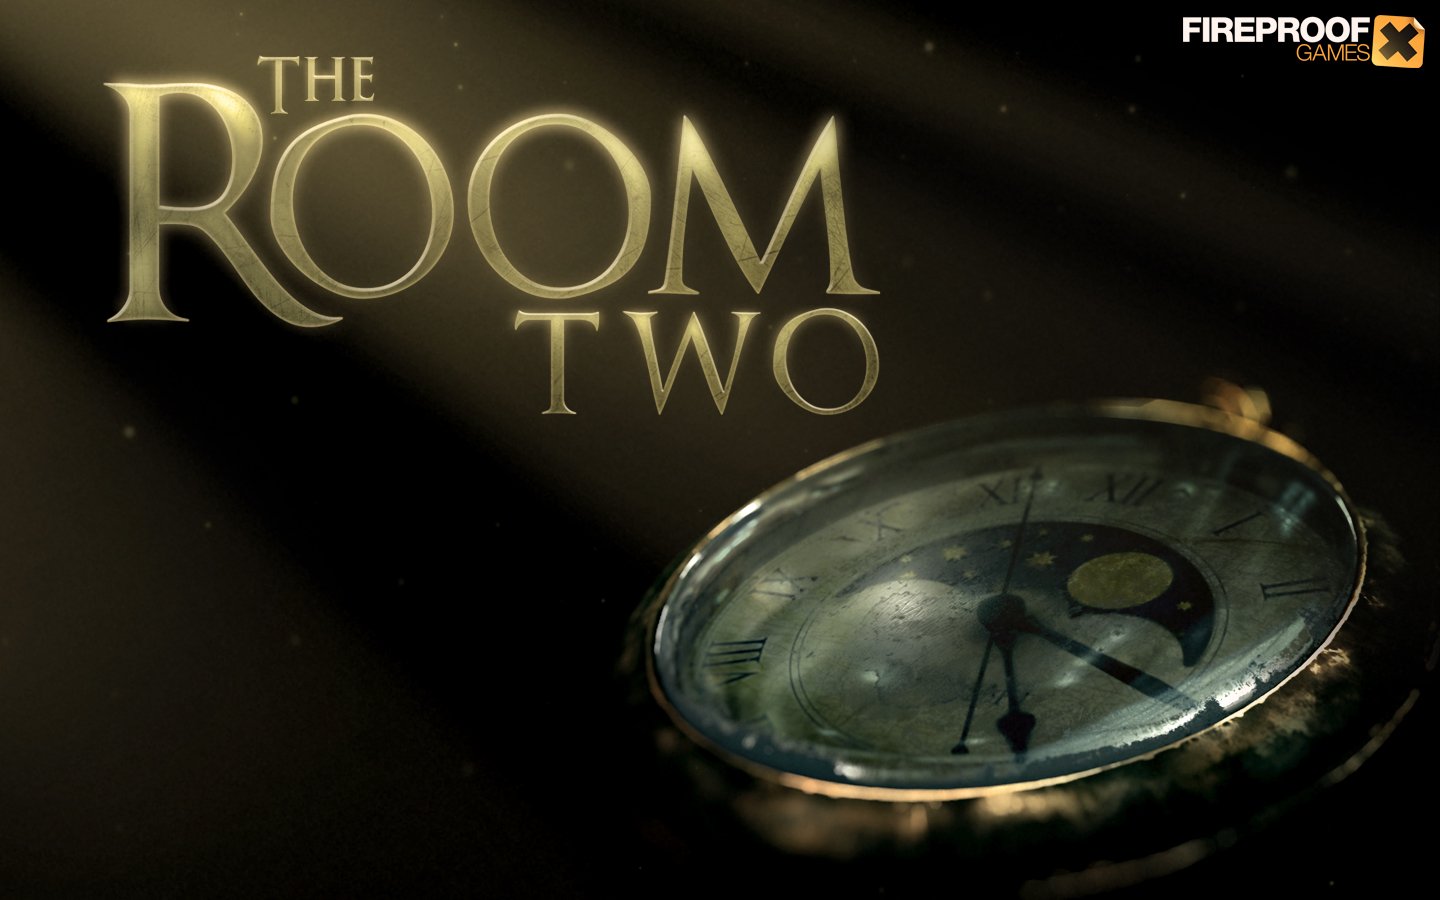 The Room kostenlos, The Room 2 Download im App Store 7